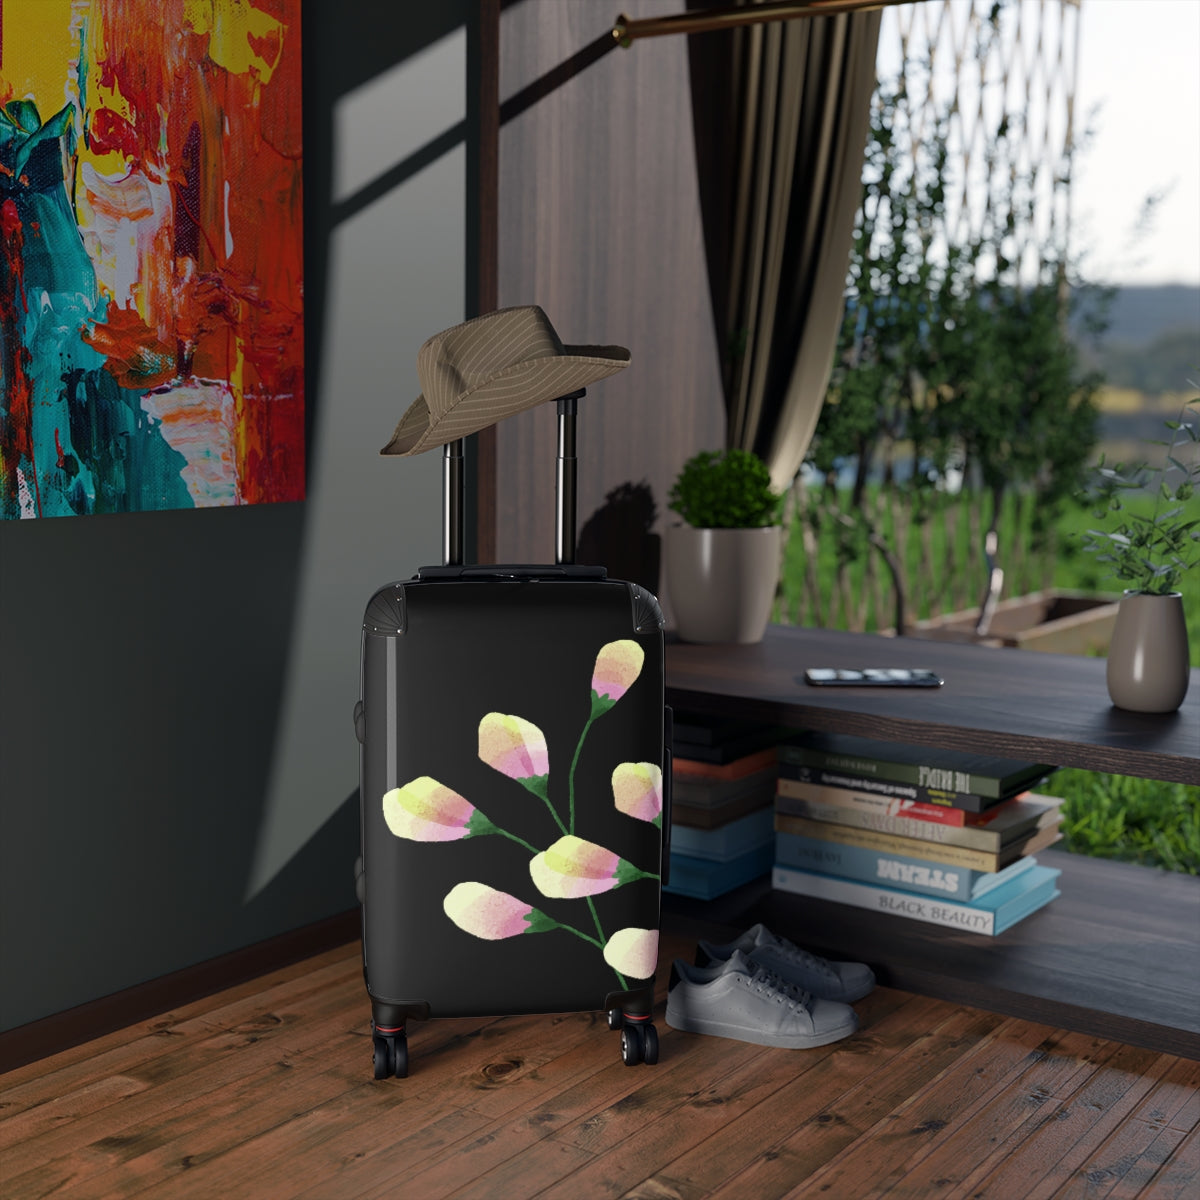 LUGGAGE WITH WHEELS, FLORAL SUITCASES FOR WOMEN,  Cabin Suitcase Carry-On Luggage, Trolly Travel Bags Double Wheeled Spinners